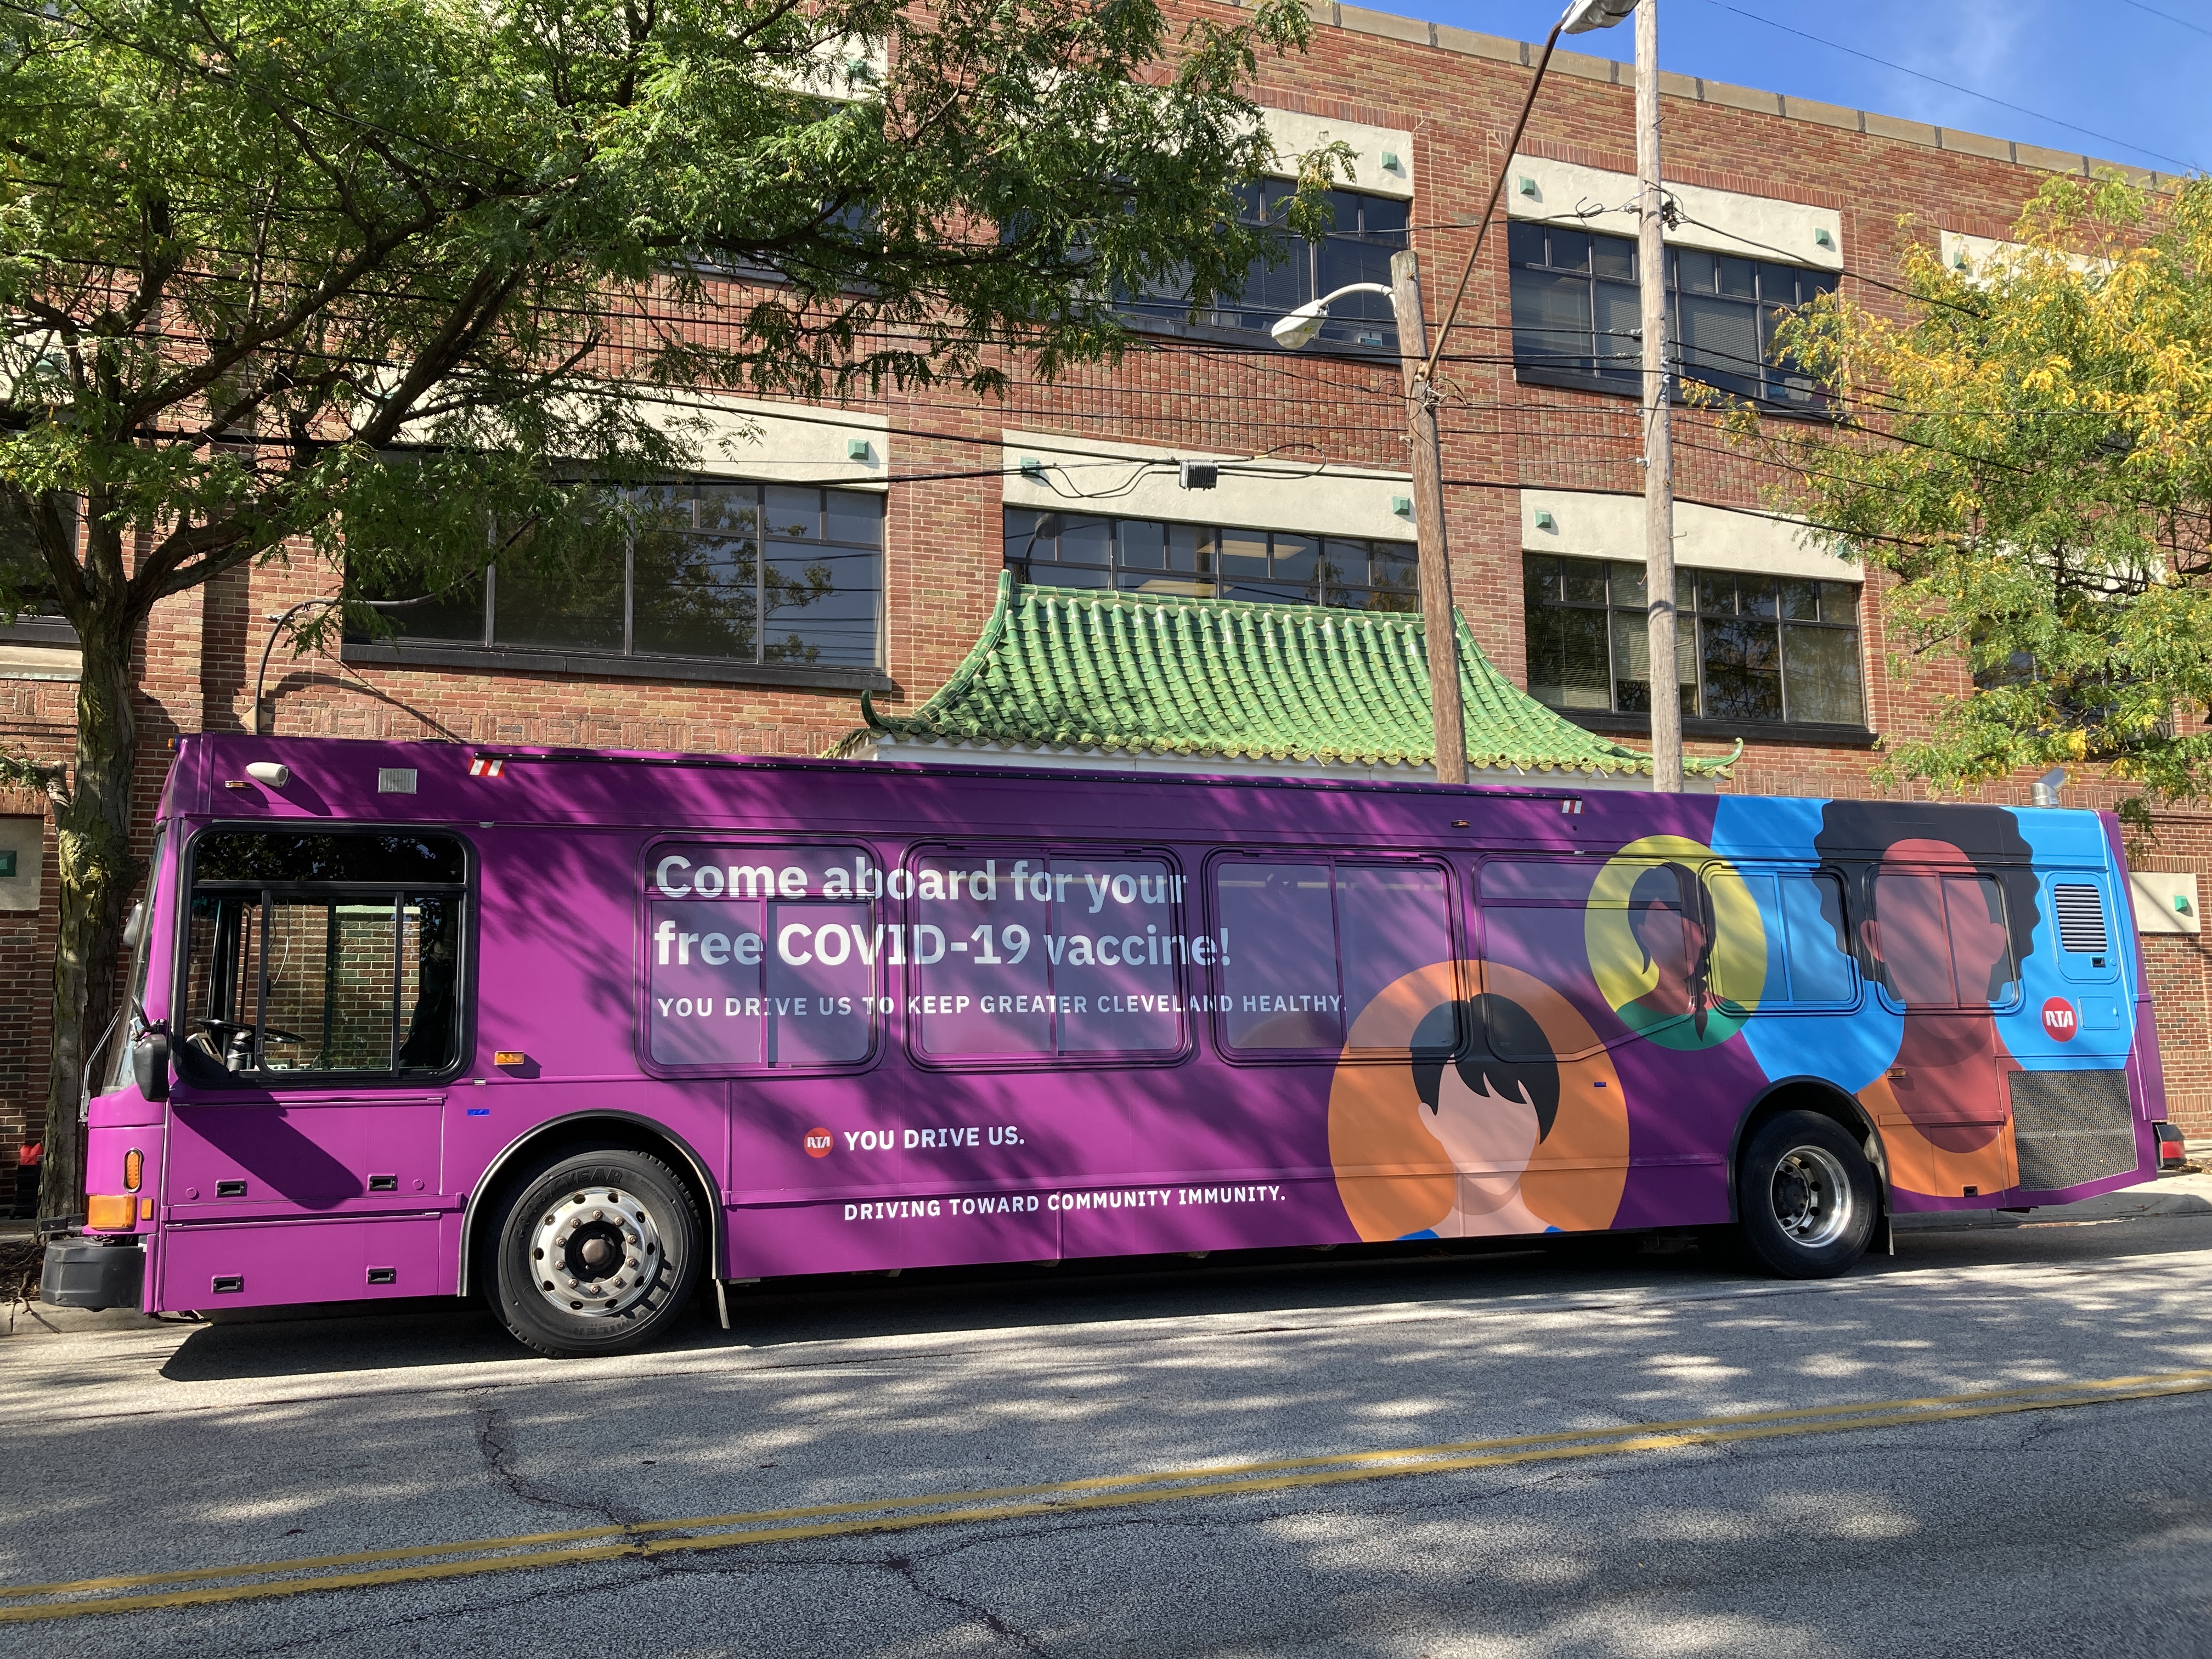 Picture of a bus painted multiple colors, featuring illustrations of people's faces, and says "Come aboard for your free vaccine"